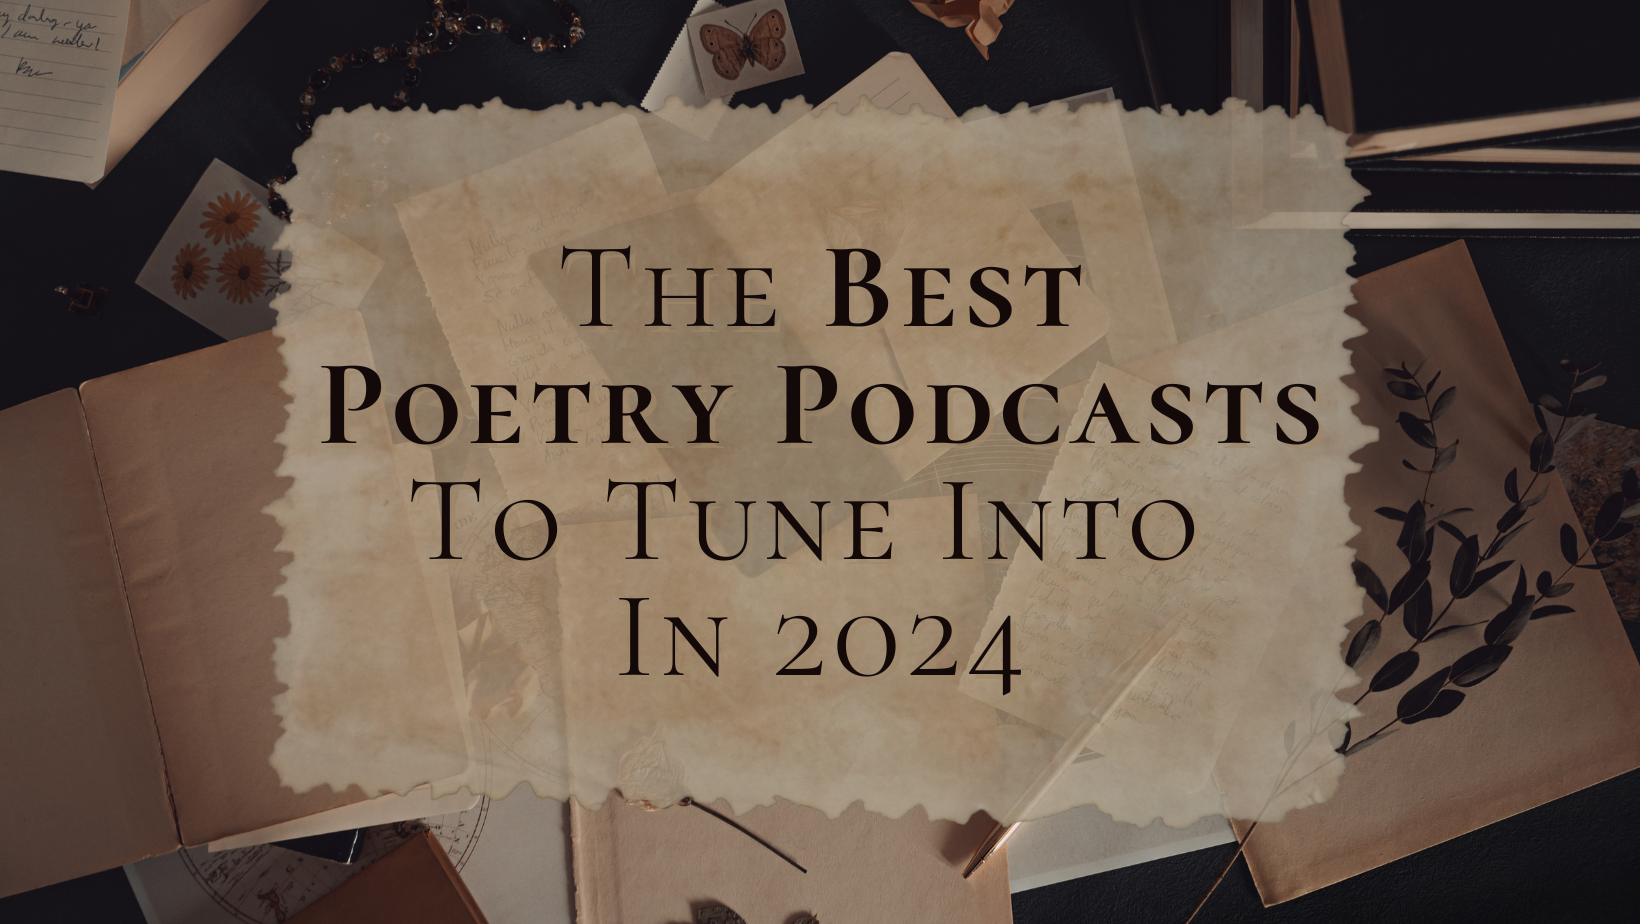 The Best Poetry Podcasts To Tune Into in 2024